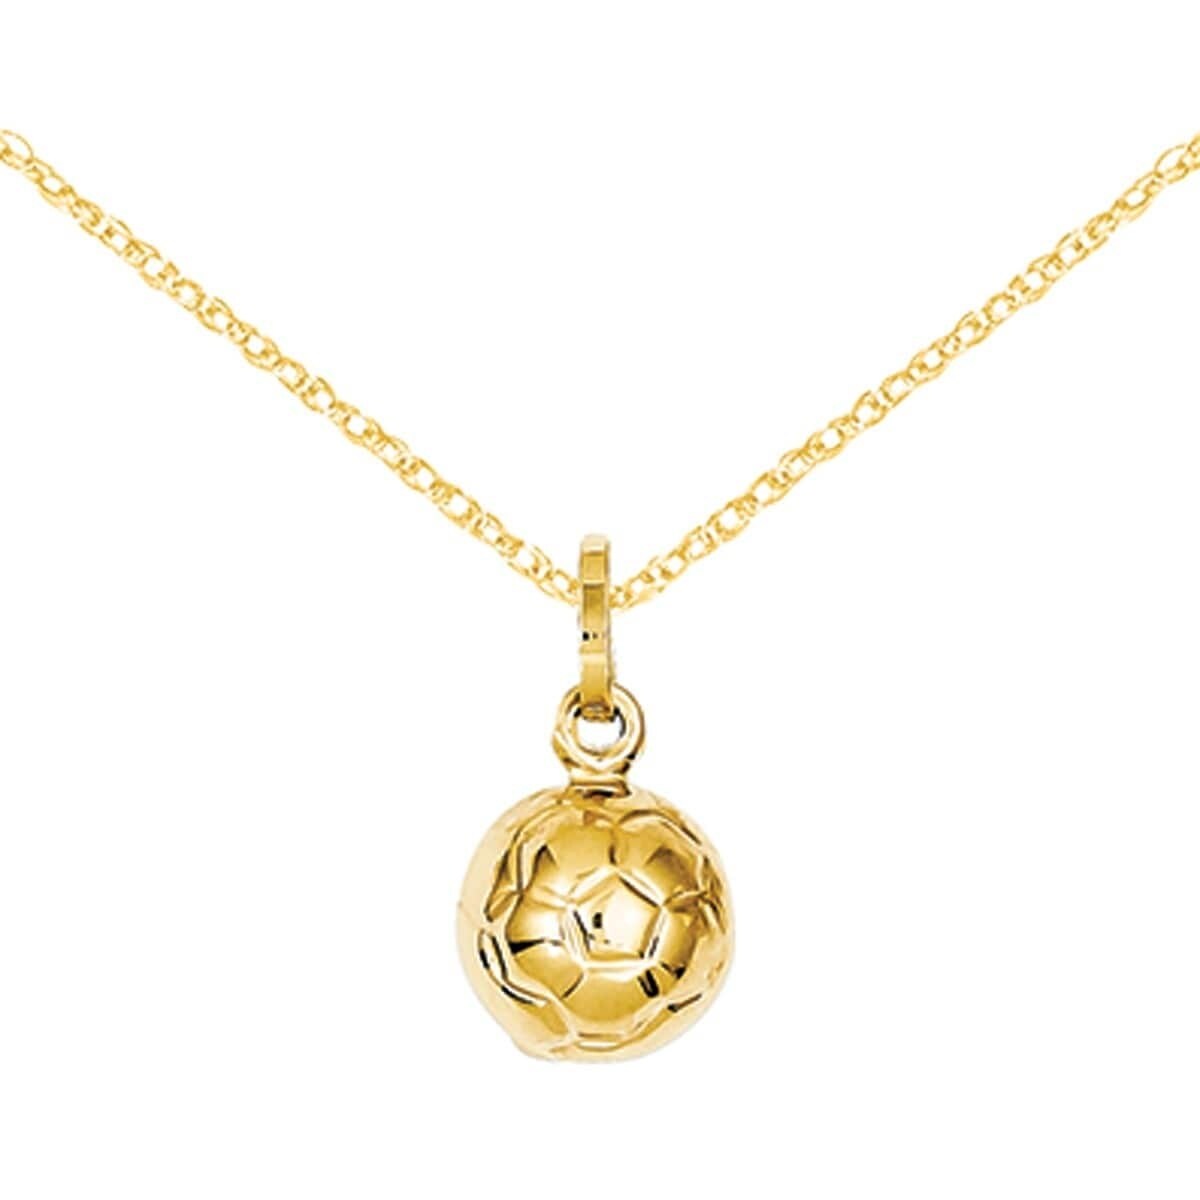 14k Yellow Gold 3 D Soccer Ball Pendant Charm Necklace Sport Fine Jewelry For Women Gifts For Her